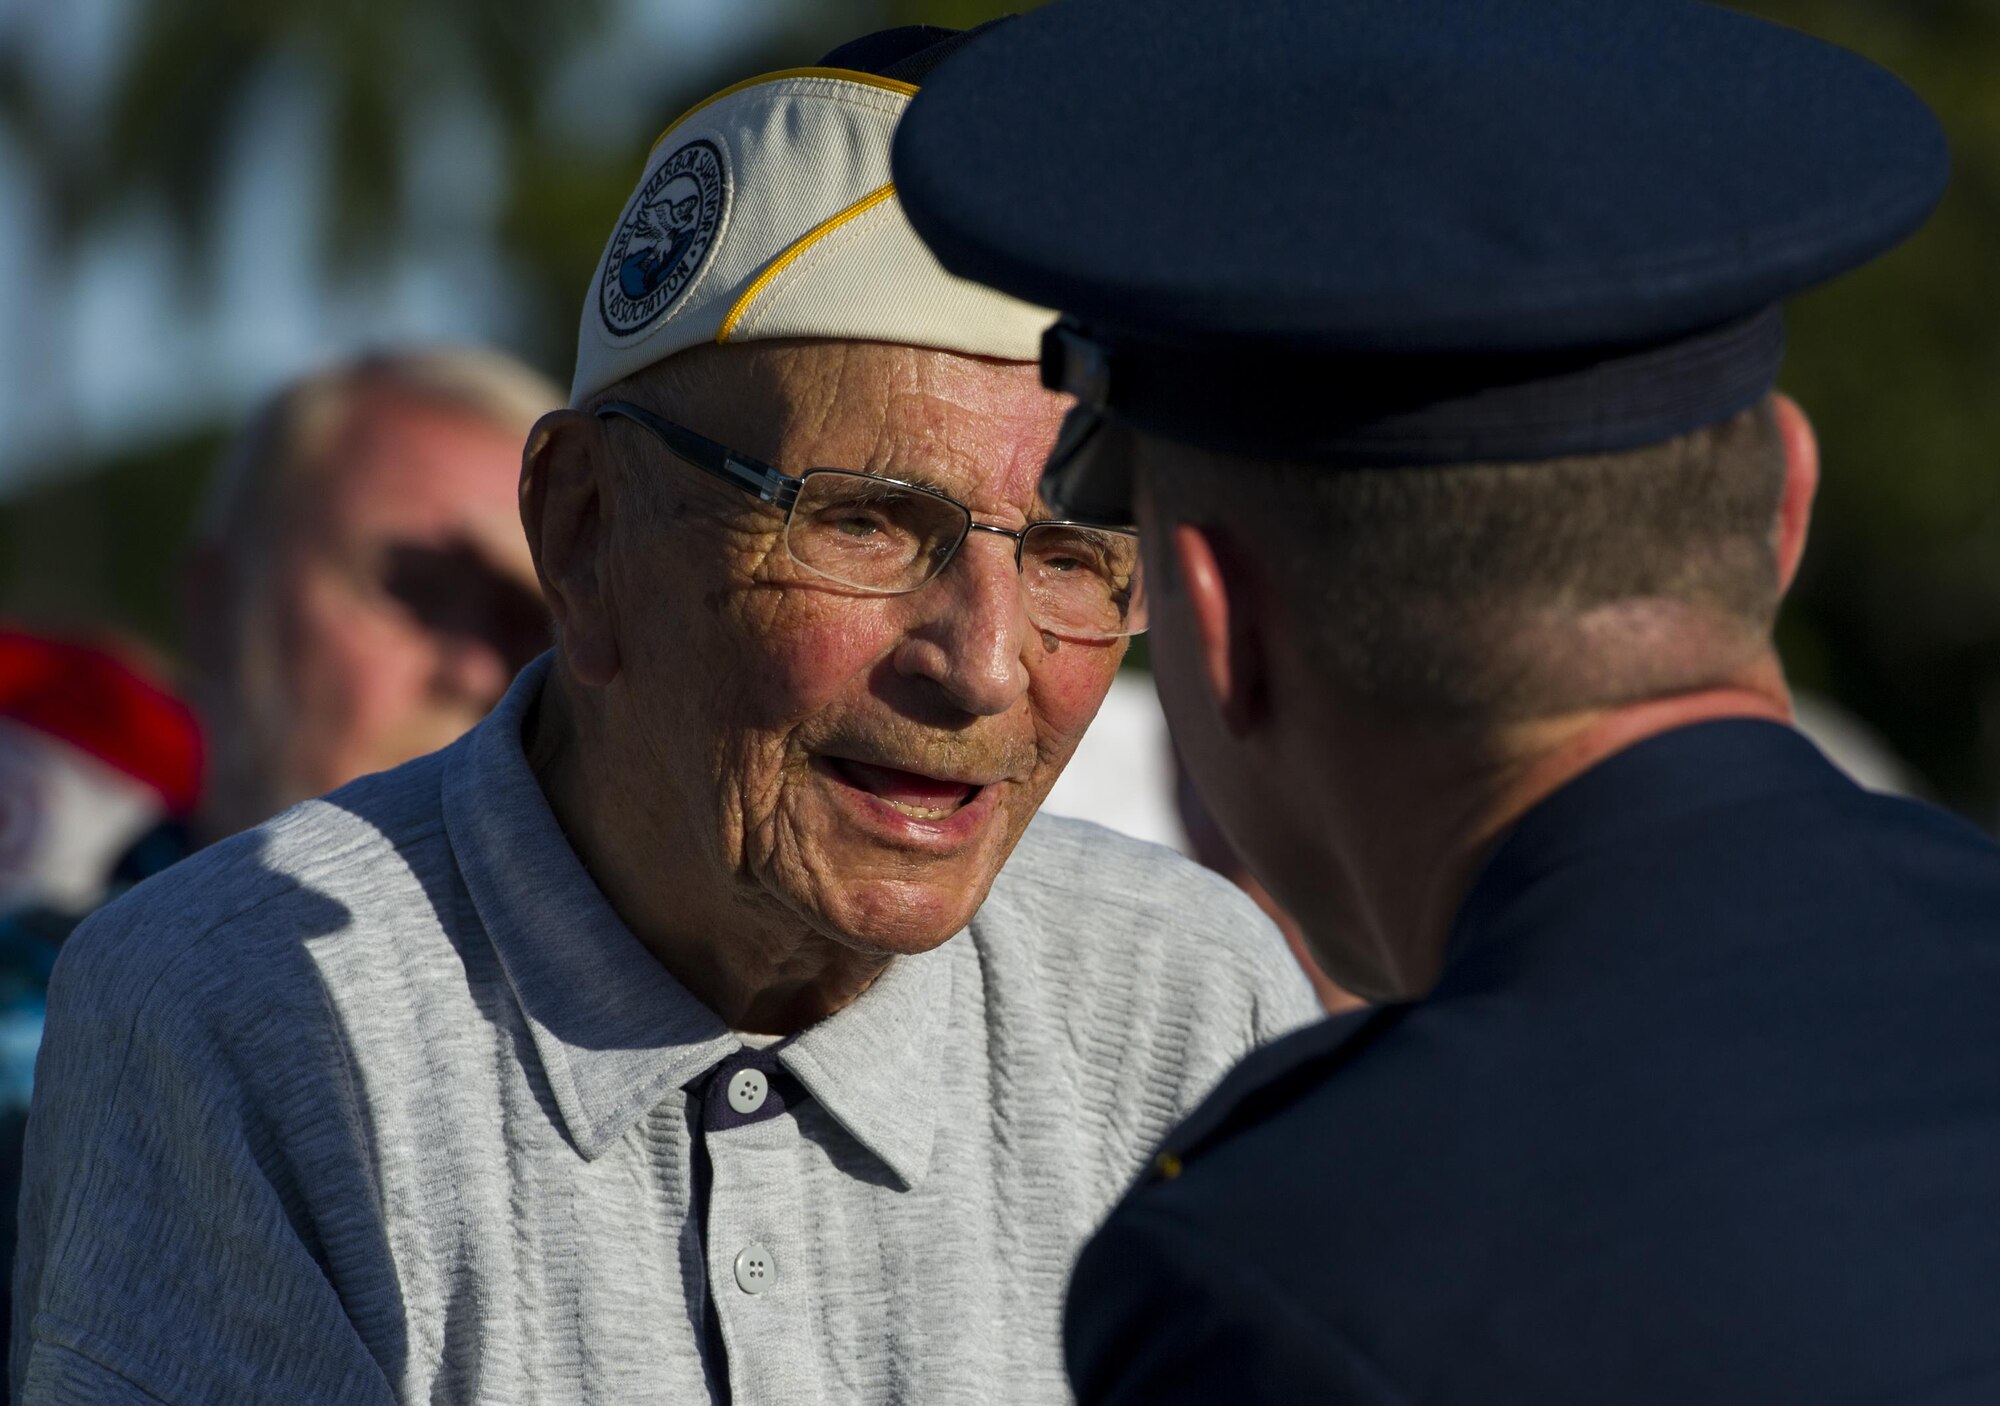 U.S. Army Private First Class Clifford McFarland, a survivor of the Hickam Field attack, converses with Col. Kevin Gordon, 15th Wing commander, while being given a gift during the 75th Commemoration of the Dec. 7, 1941 Attack on Hickam Field ceremony Dec. 7, 2016, at Joint Base Pearl Harbor-Hickam, Hawaii. On Dec. 7, 1941, McFarland witnessed a Japanese aircraft maneuver around the church steeple, shoot at the barracks, and take out the B-17 Flying Fortress and B-18 Bolo aircraft on the flightline. He spent the remainder of the day transporting water to a machine gun being used to repel the attackers. (U.S. Air Force photo by Tech. Sgt. Nathan Allen)